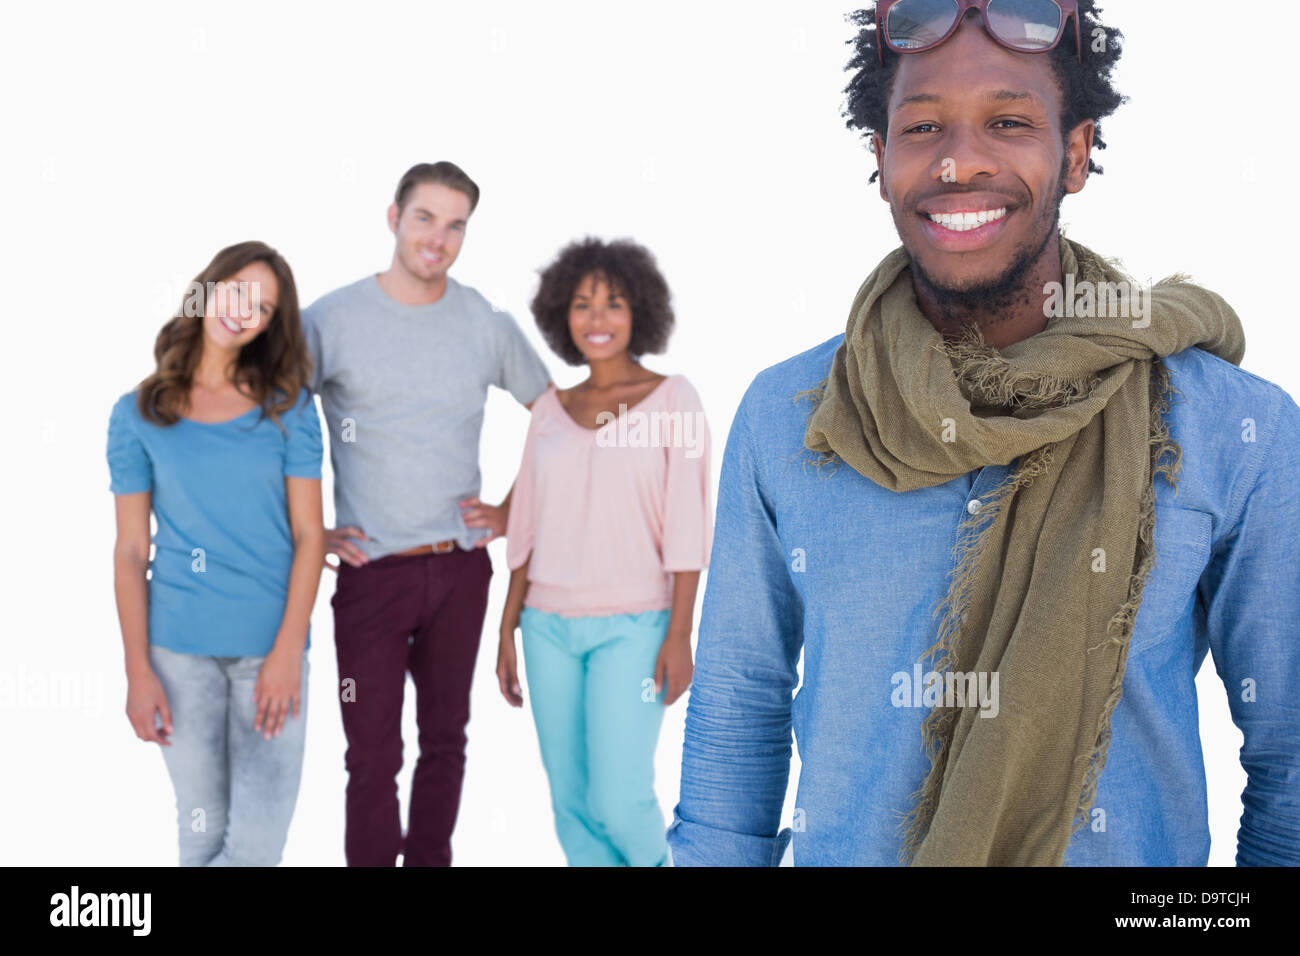 Fashion man standing in front of others young people Stock Photo